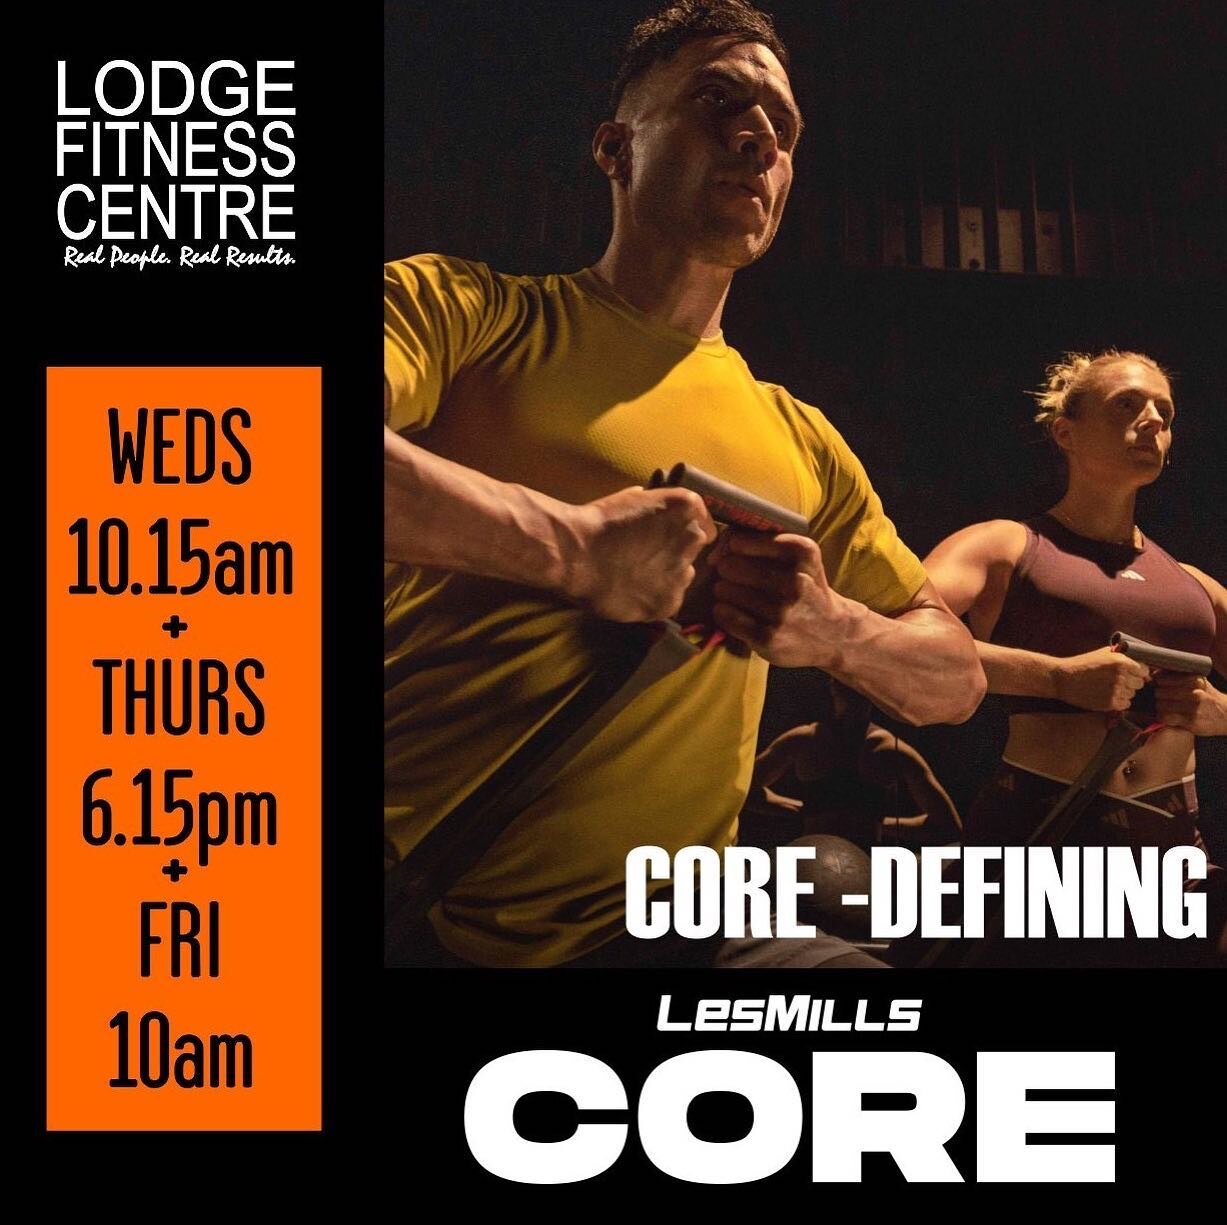 Have you tried Les Mills CORE? Improve your functional strength with this CORE-defining workout. 30mins and you&rsquo;re done! BOOK NOW on the app! 🧡